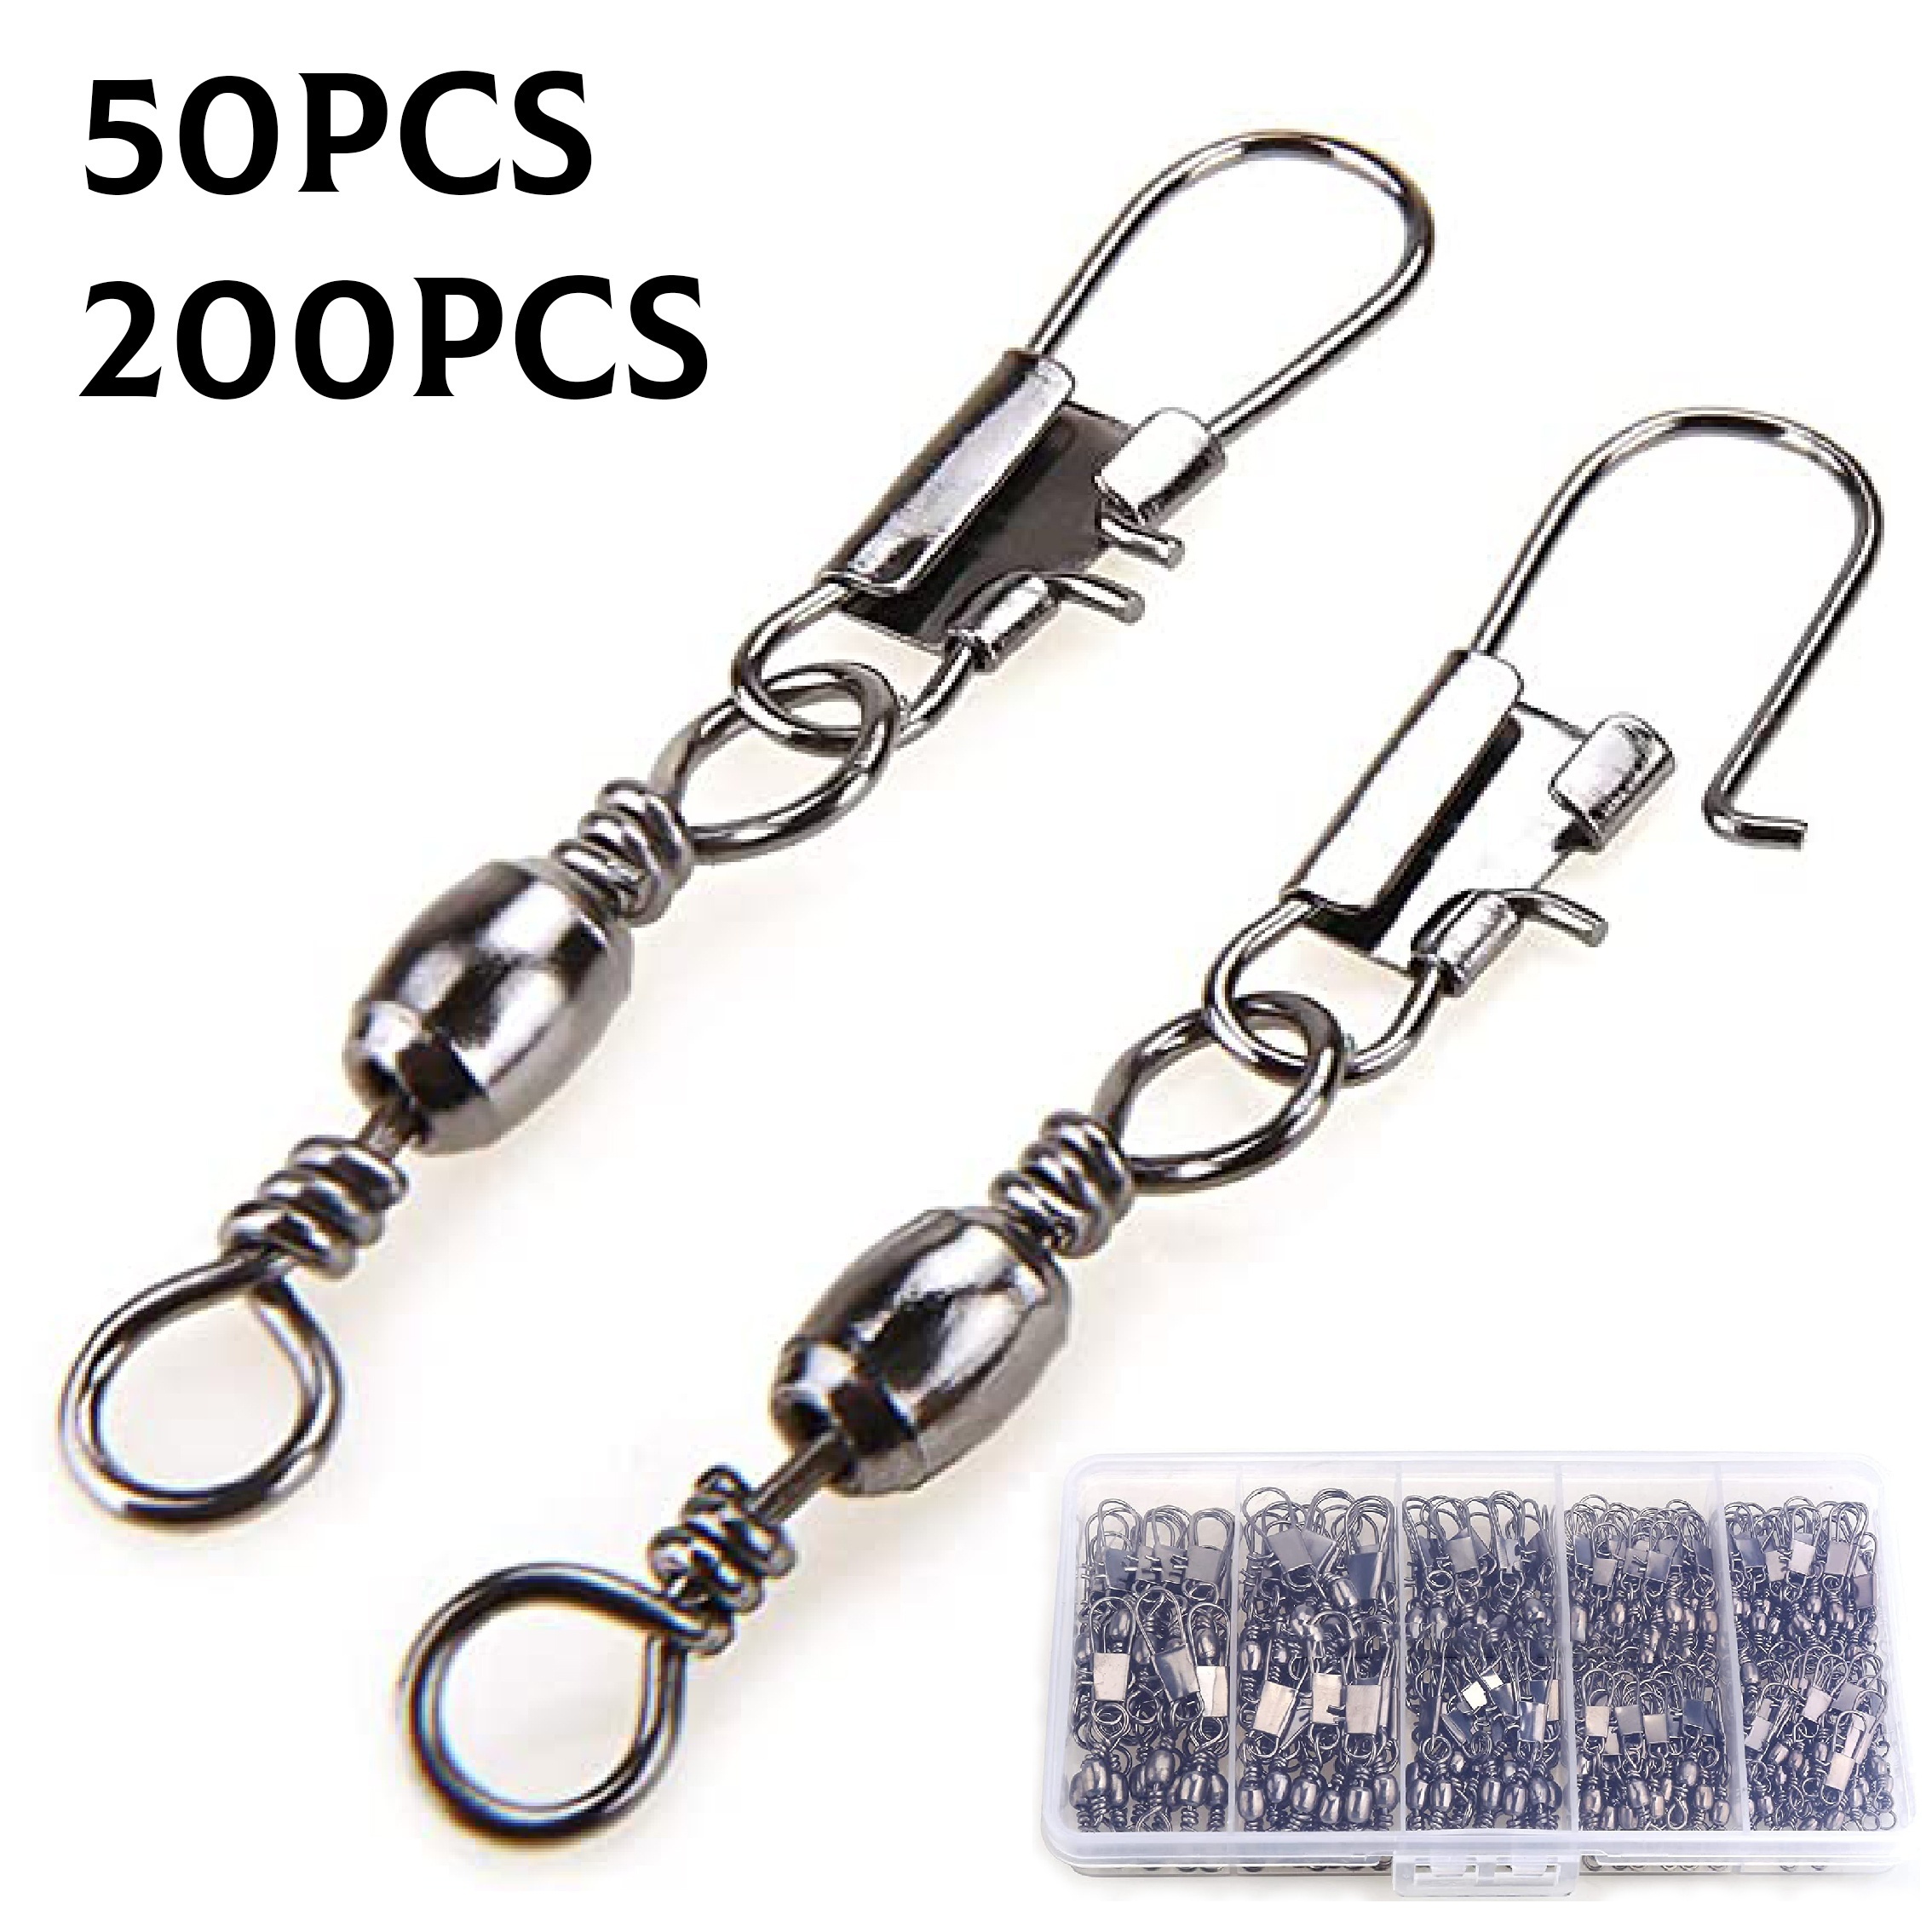 50/200pcs Premium Fishing Snap Swivels with Ball Bearing Connectors - Quick  Connect Fishing Lures with Black Nickel Copper Finish (26-132lb)